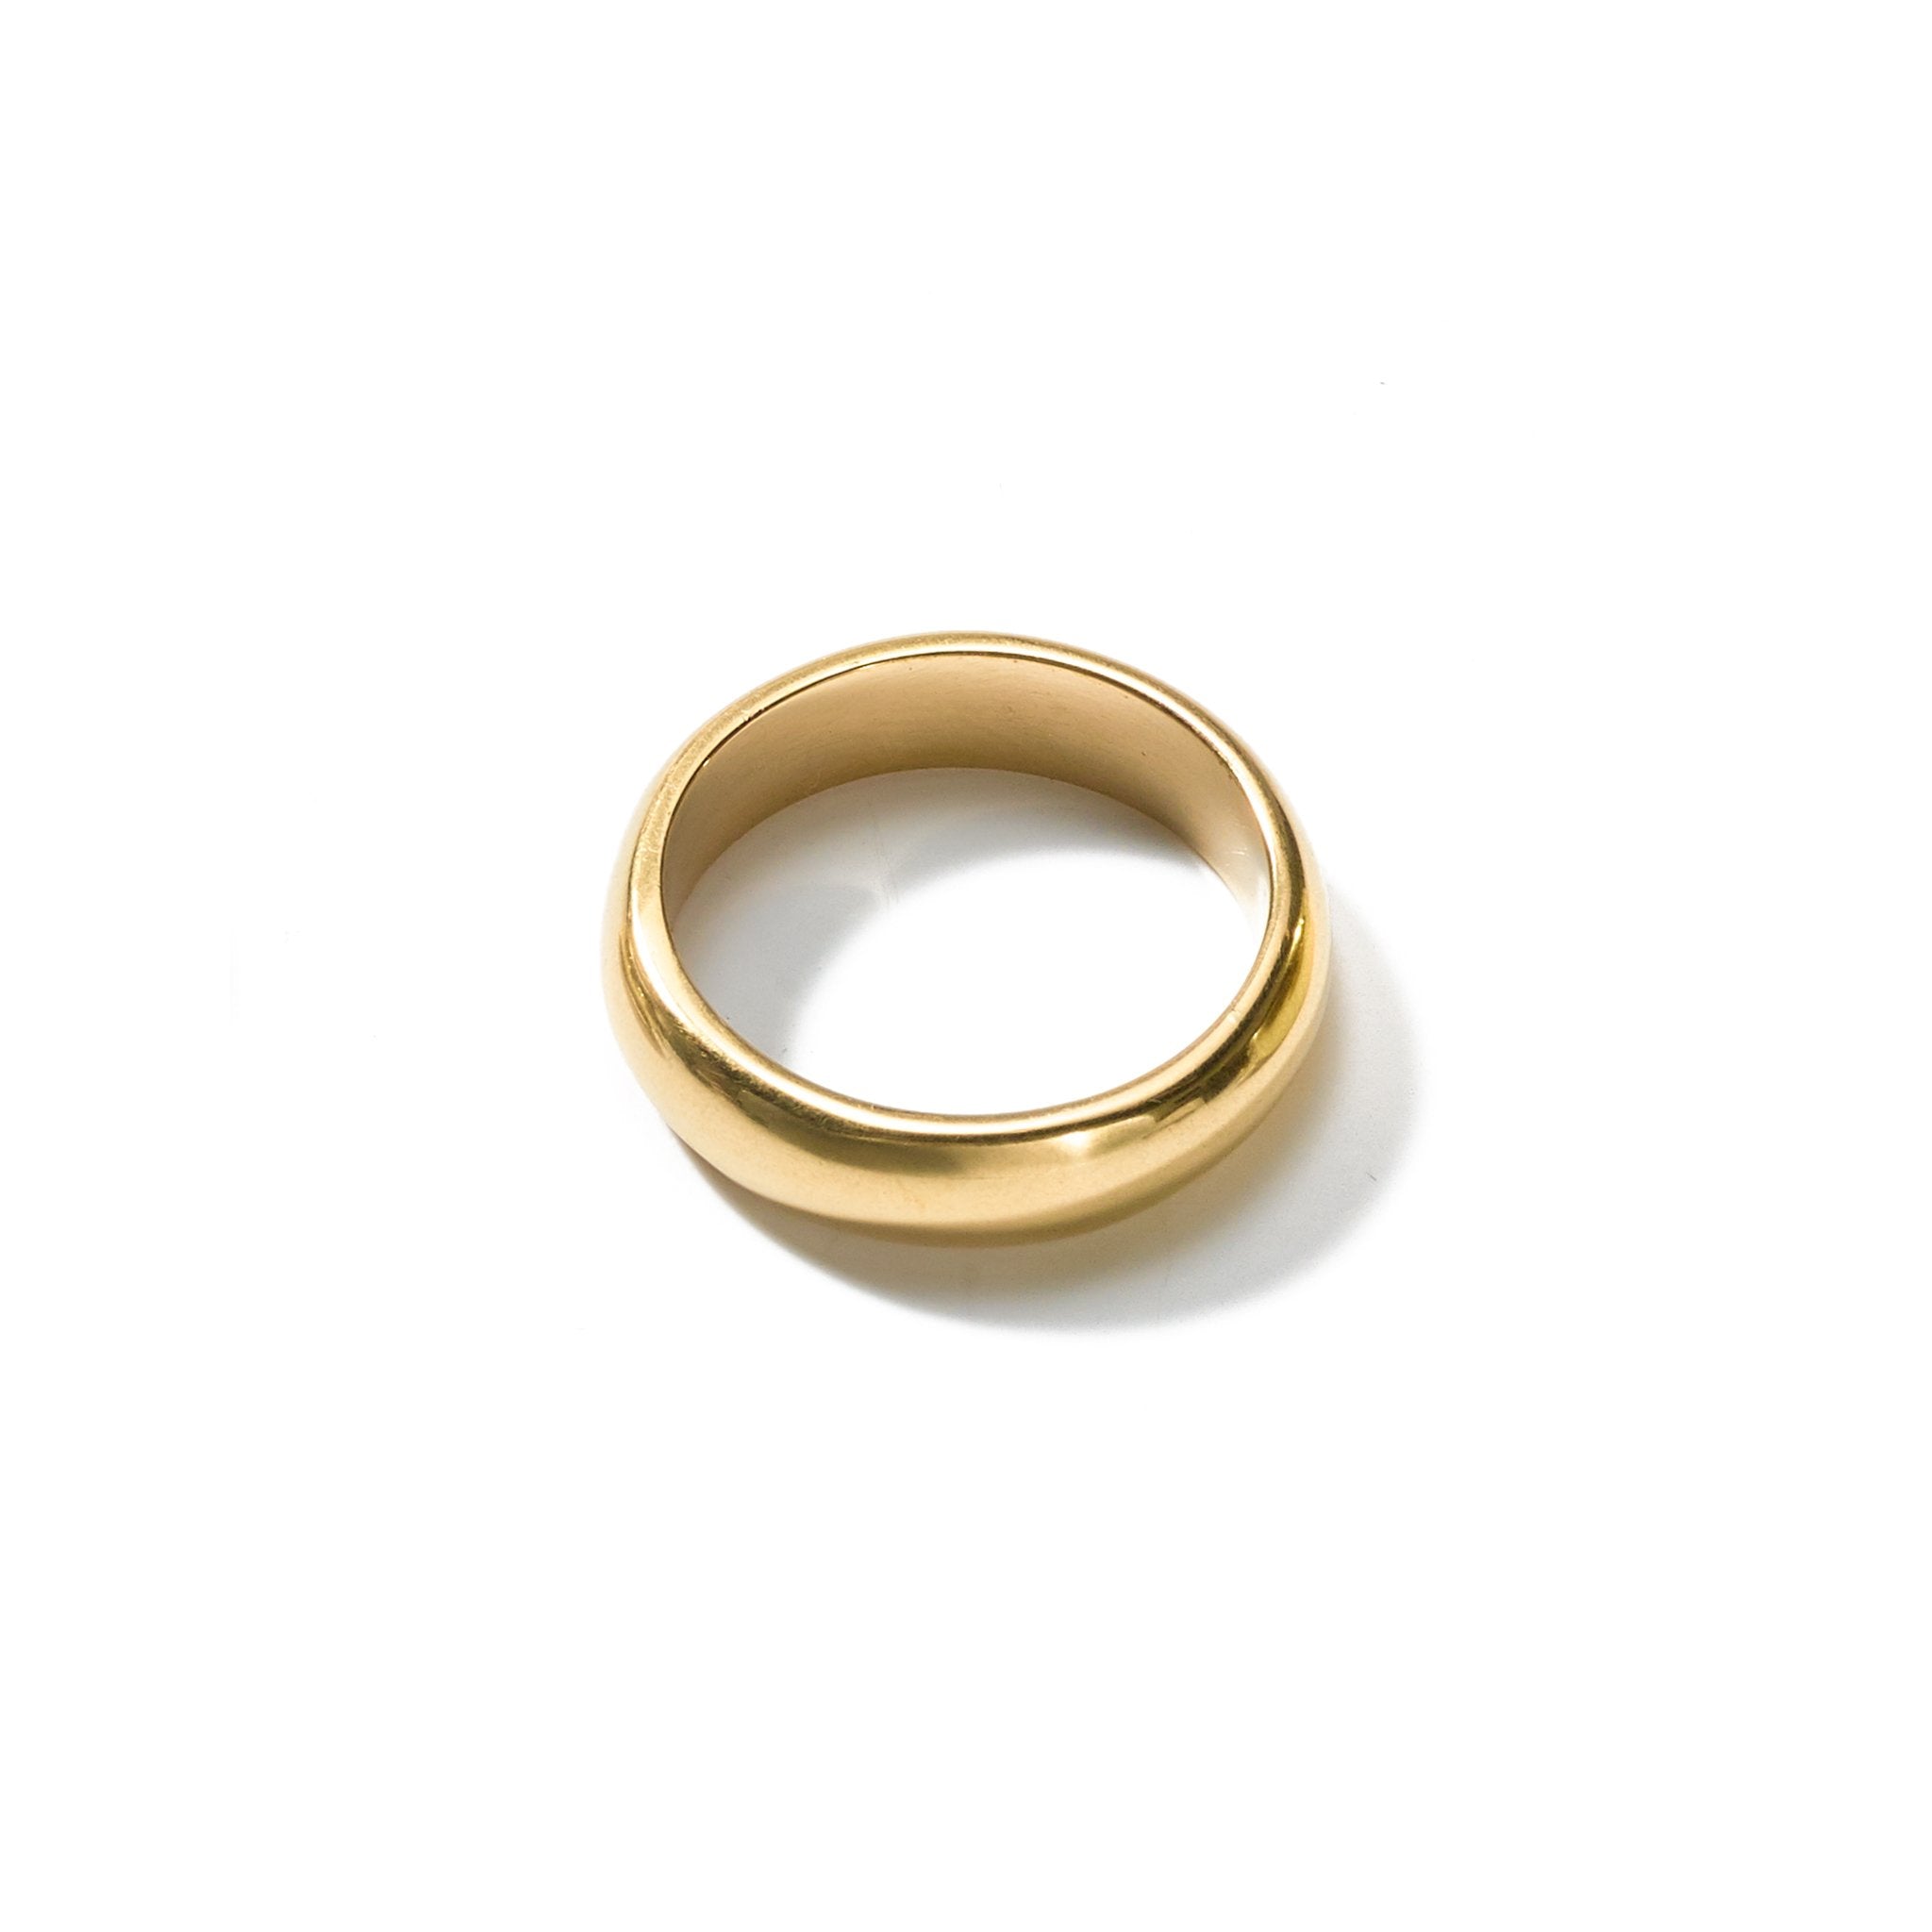 A simple yet elegant size 8 ring handcrafted from upcycled brass, featuring a narrow width, and made to be worn every day.